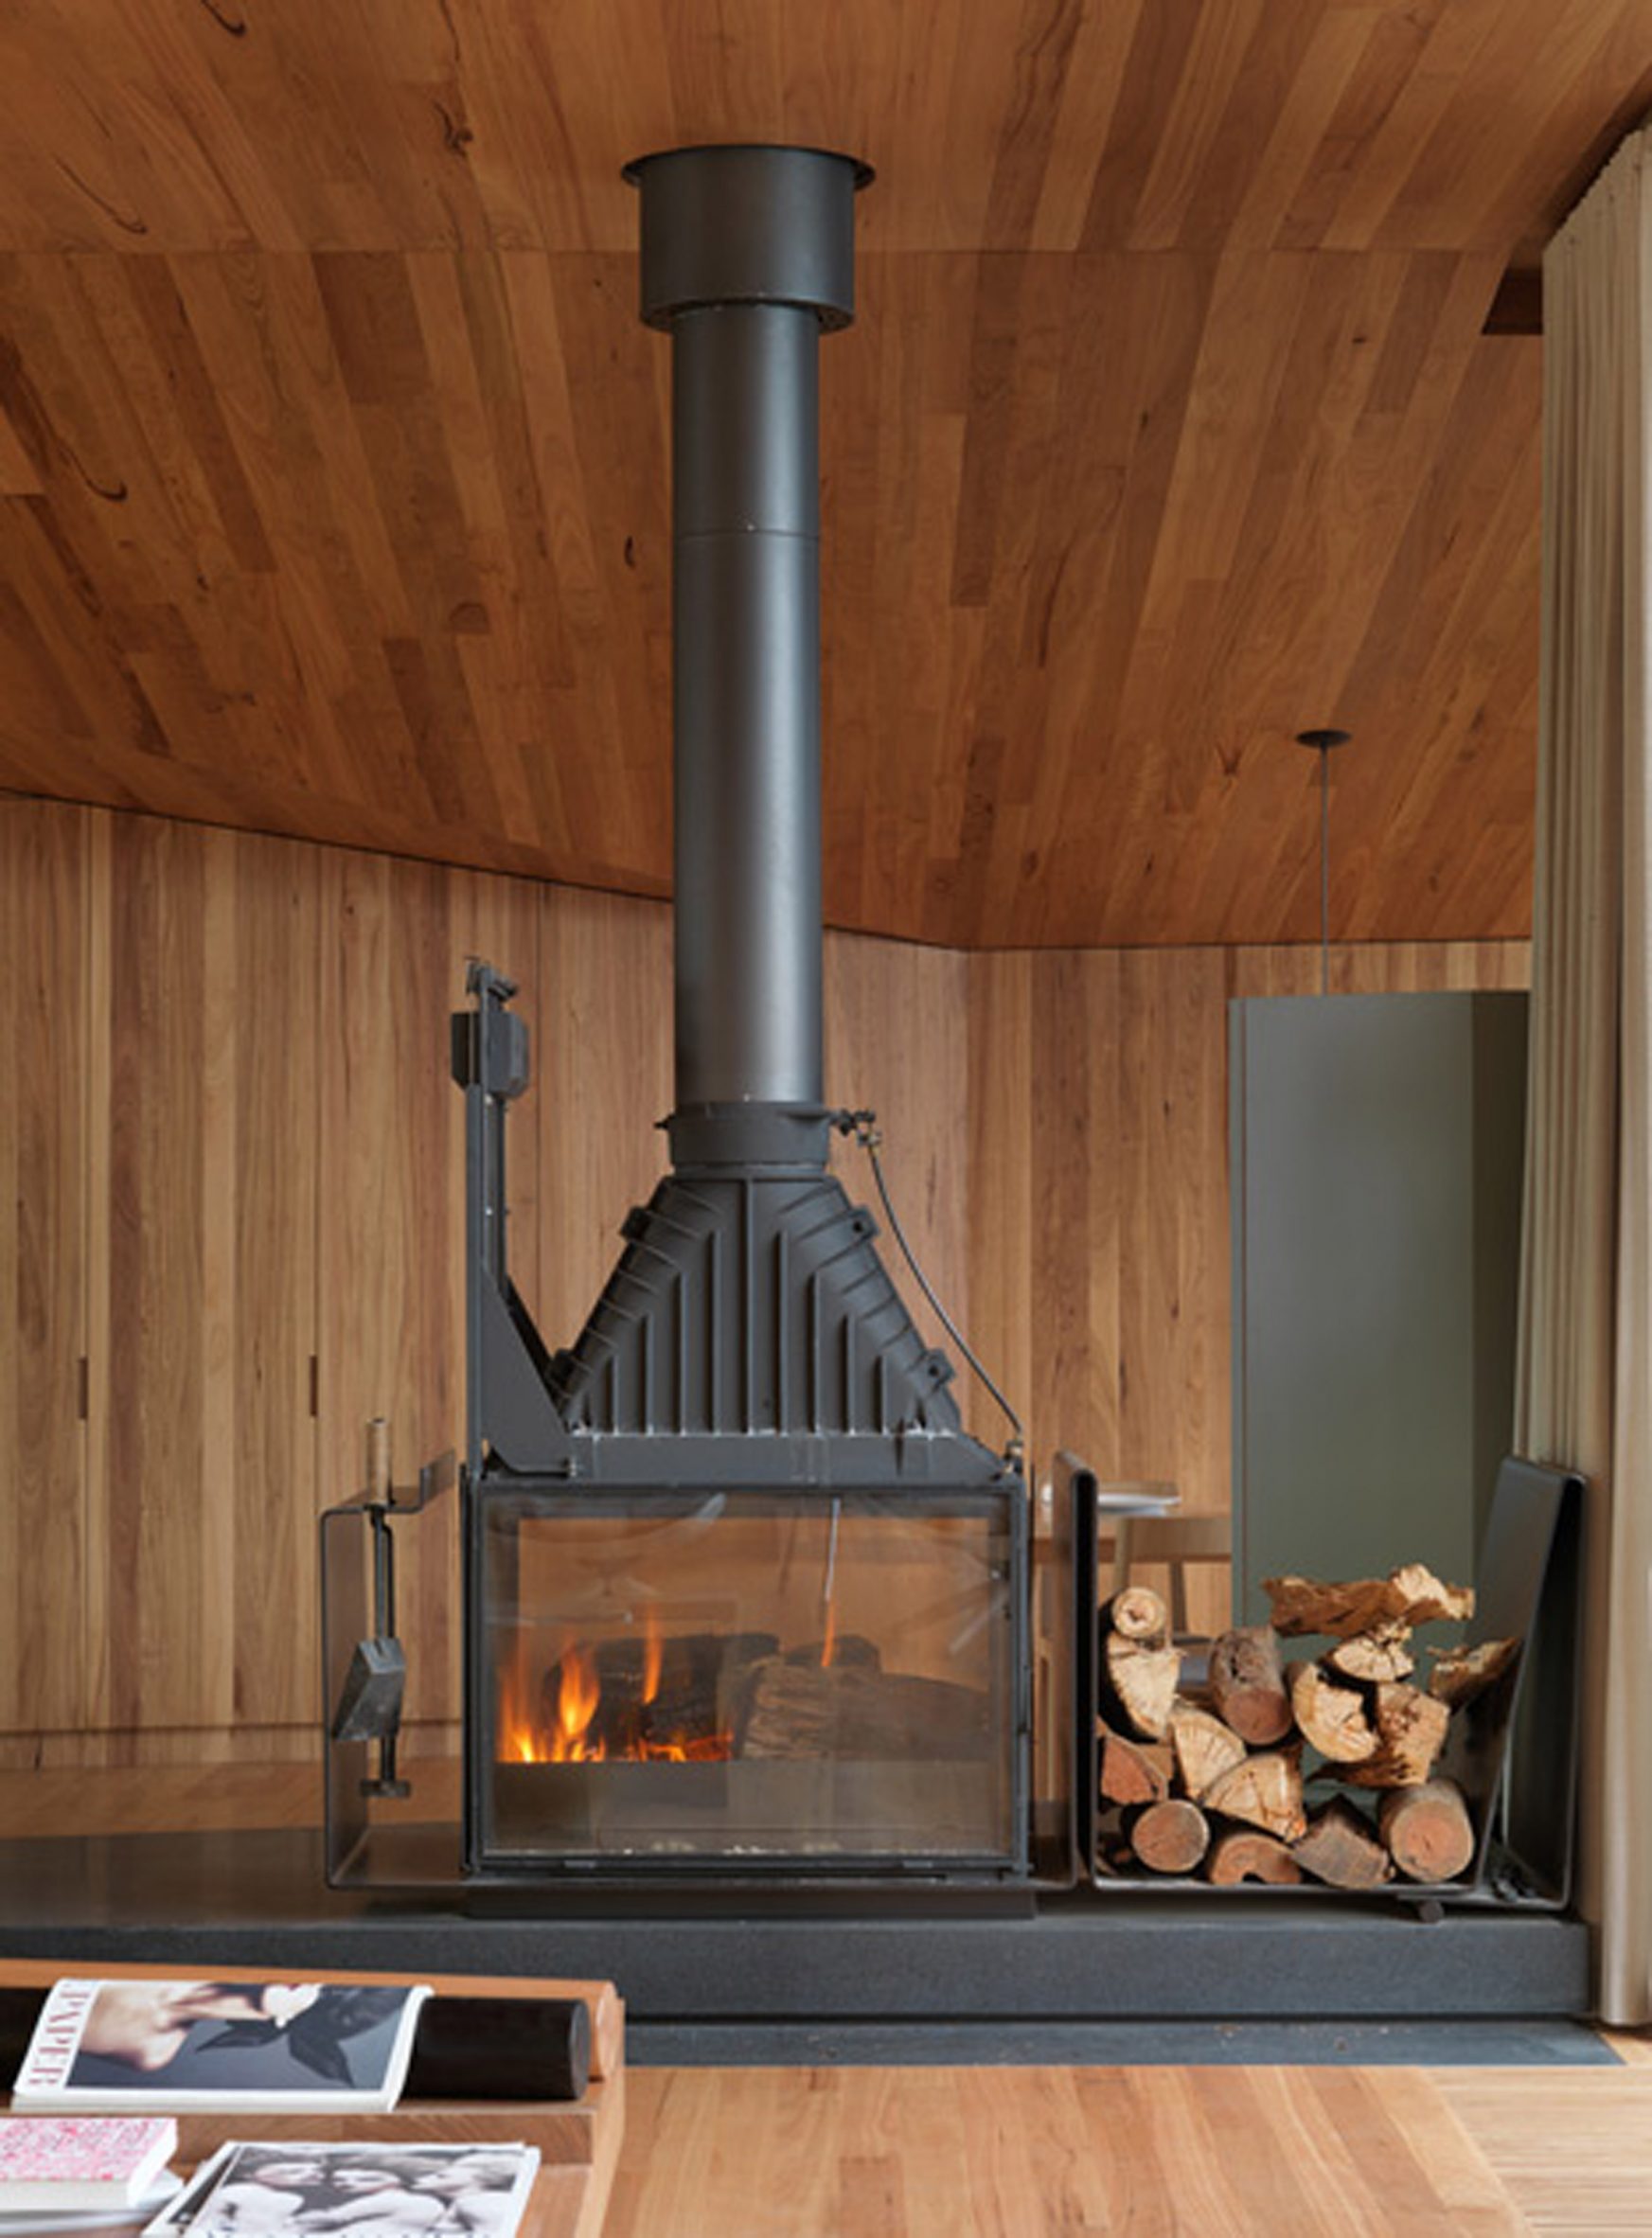 Interior of a home with a wood-burning fireplace